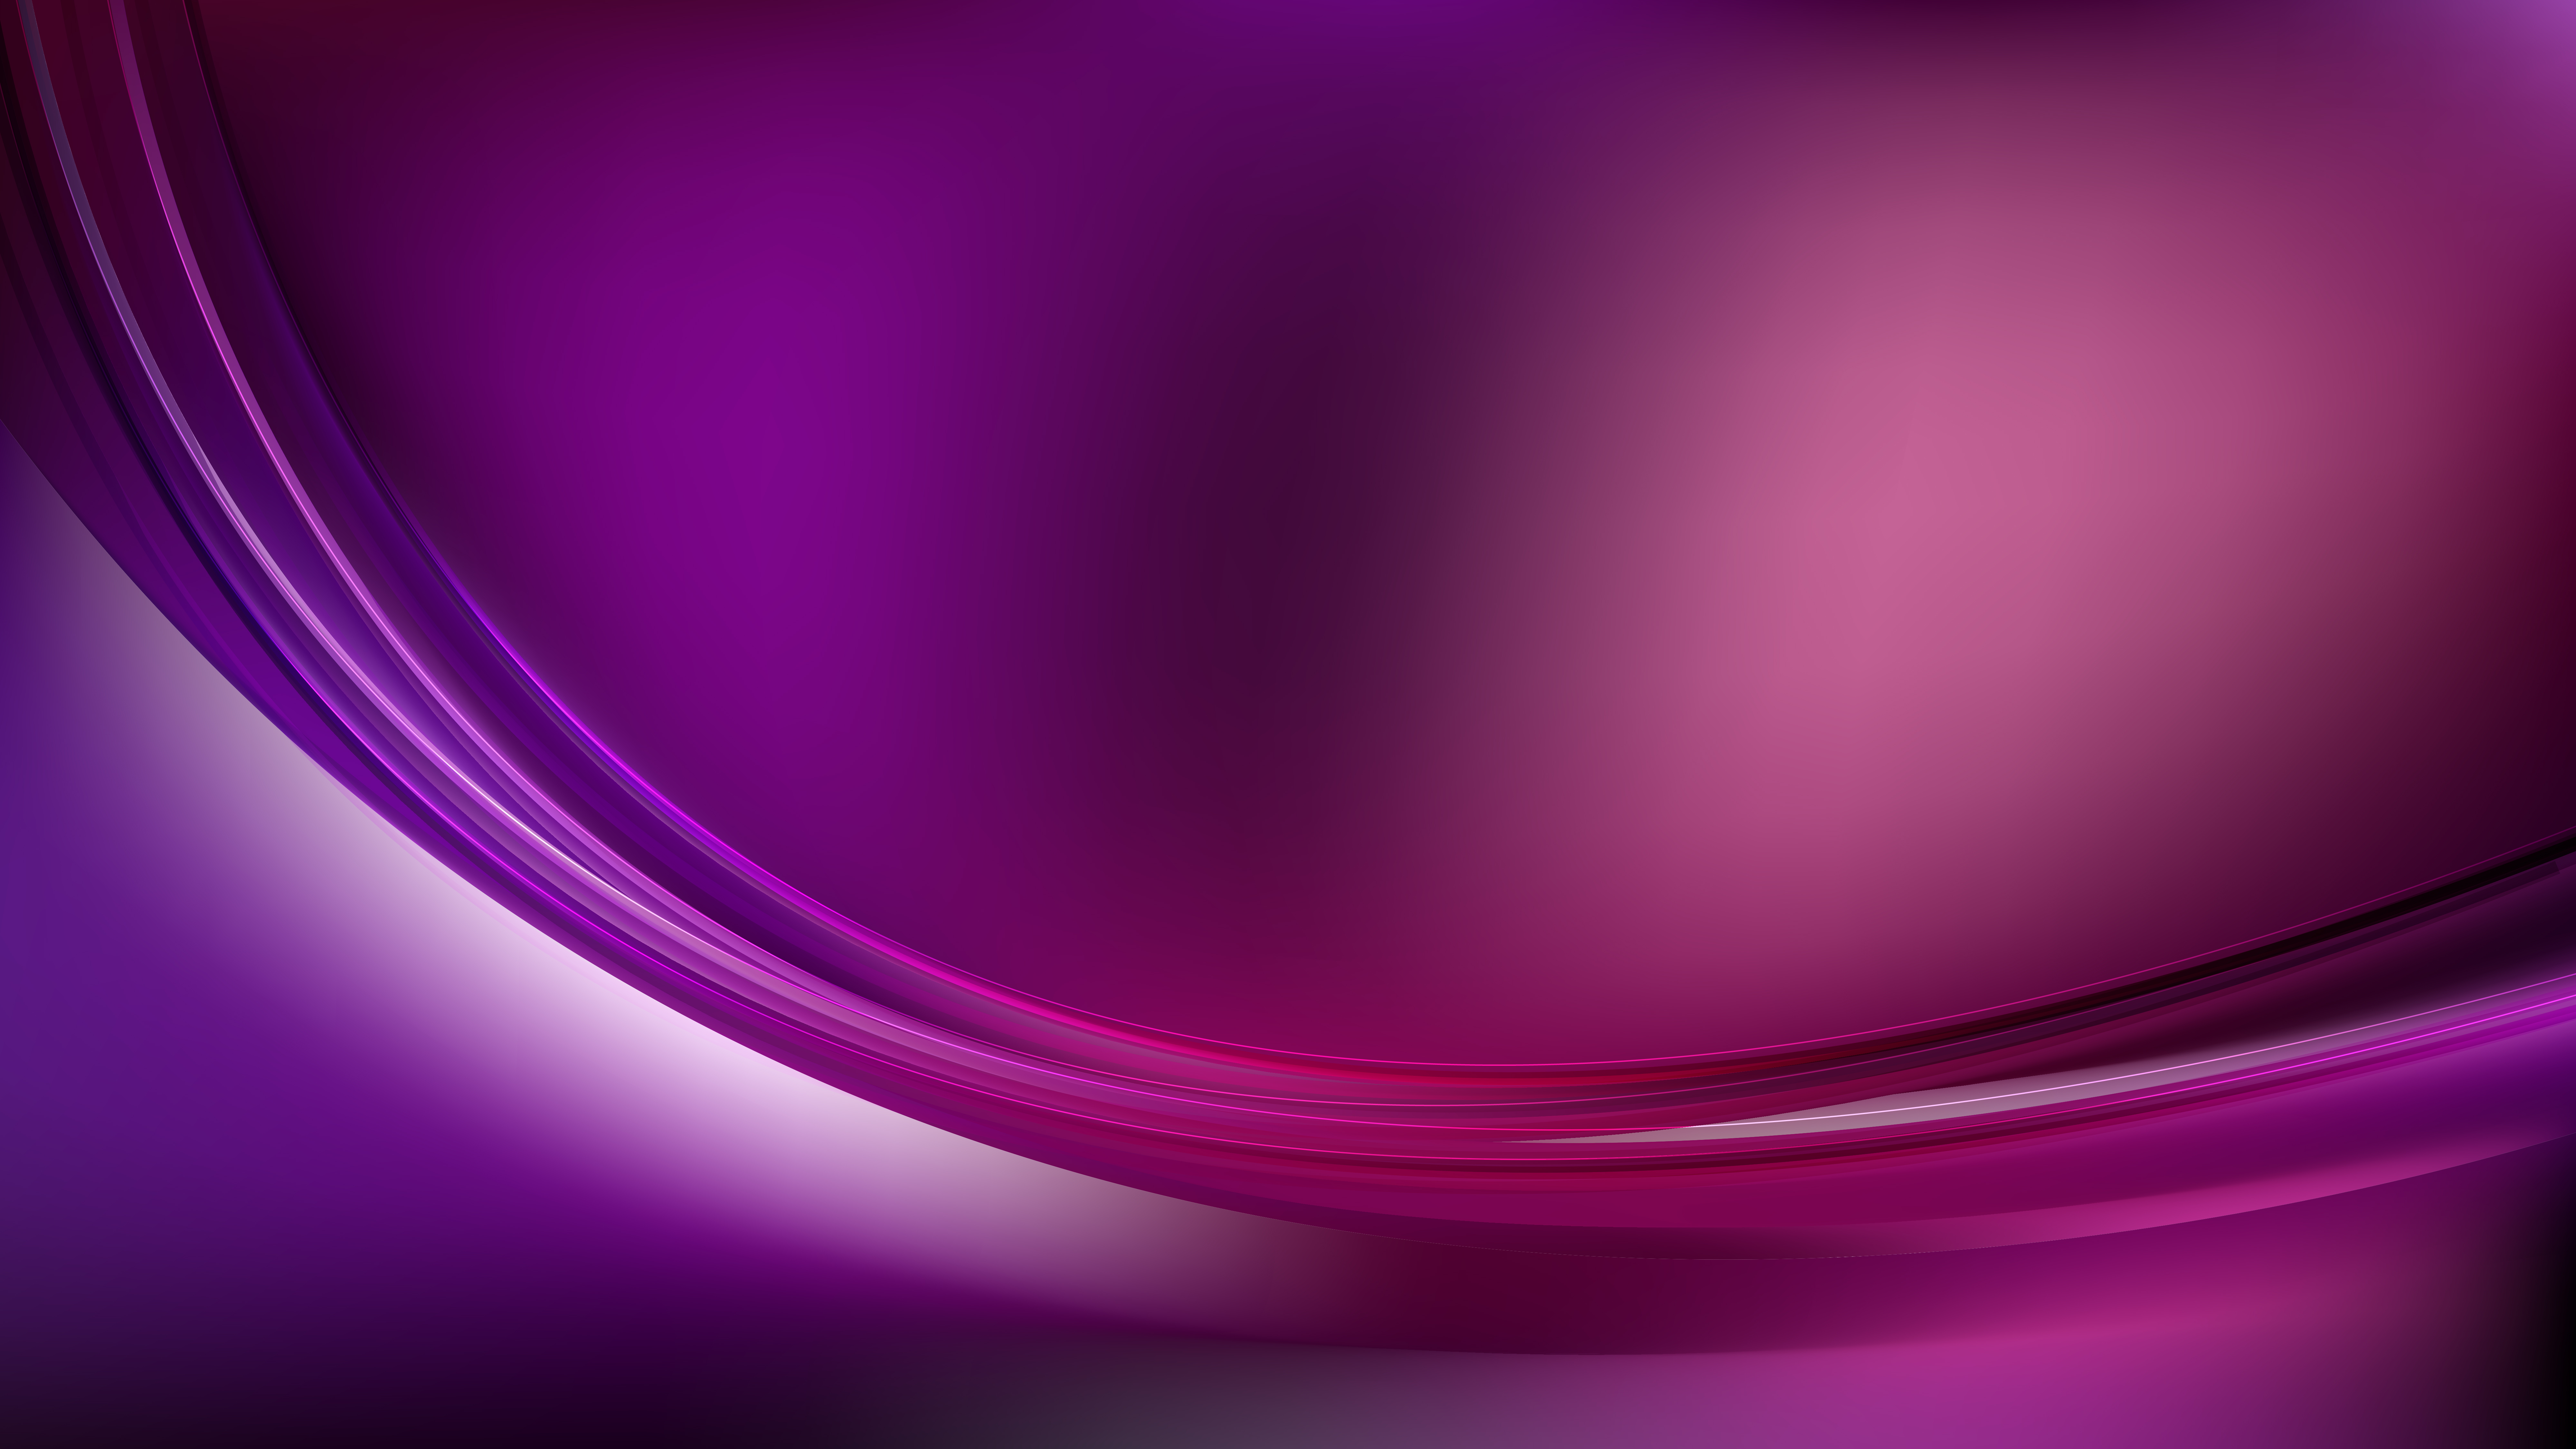 Free Abstract Purple and Black Wave Background Vector Image